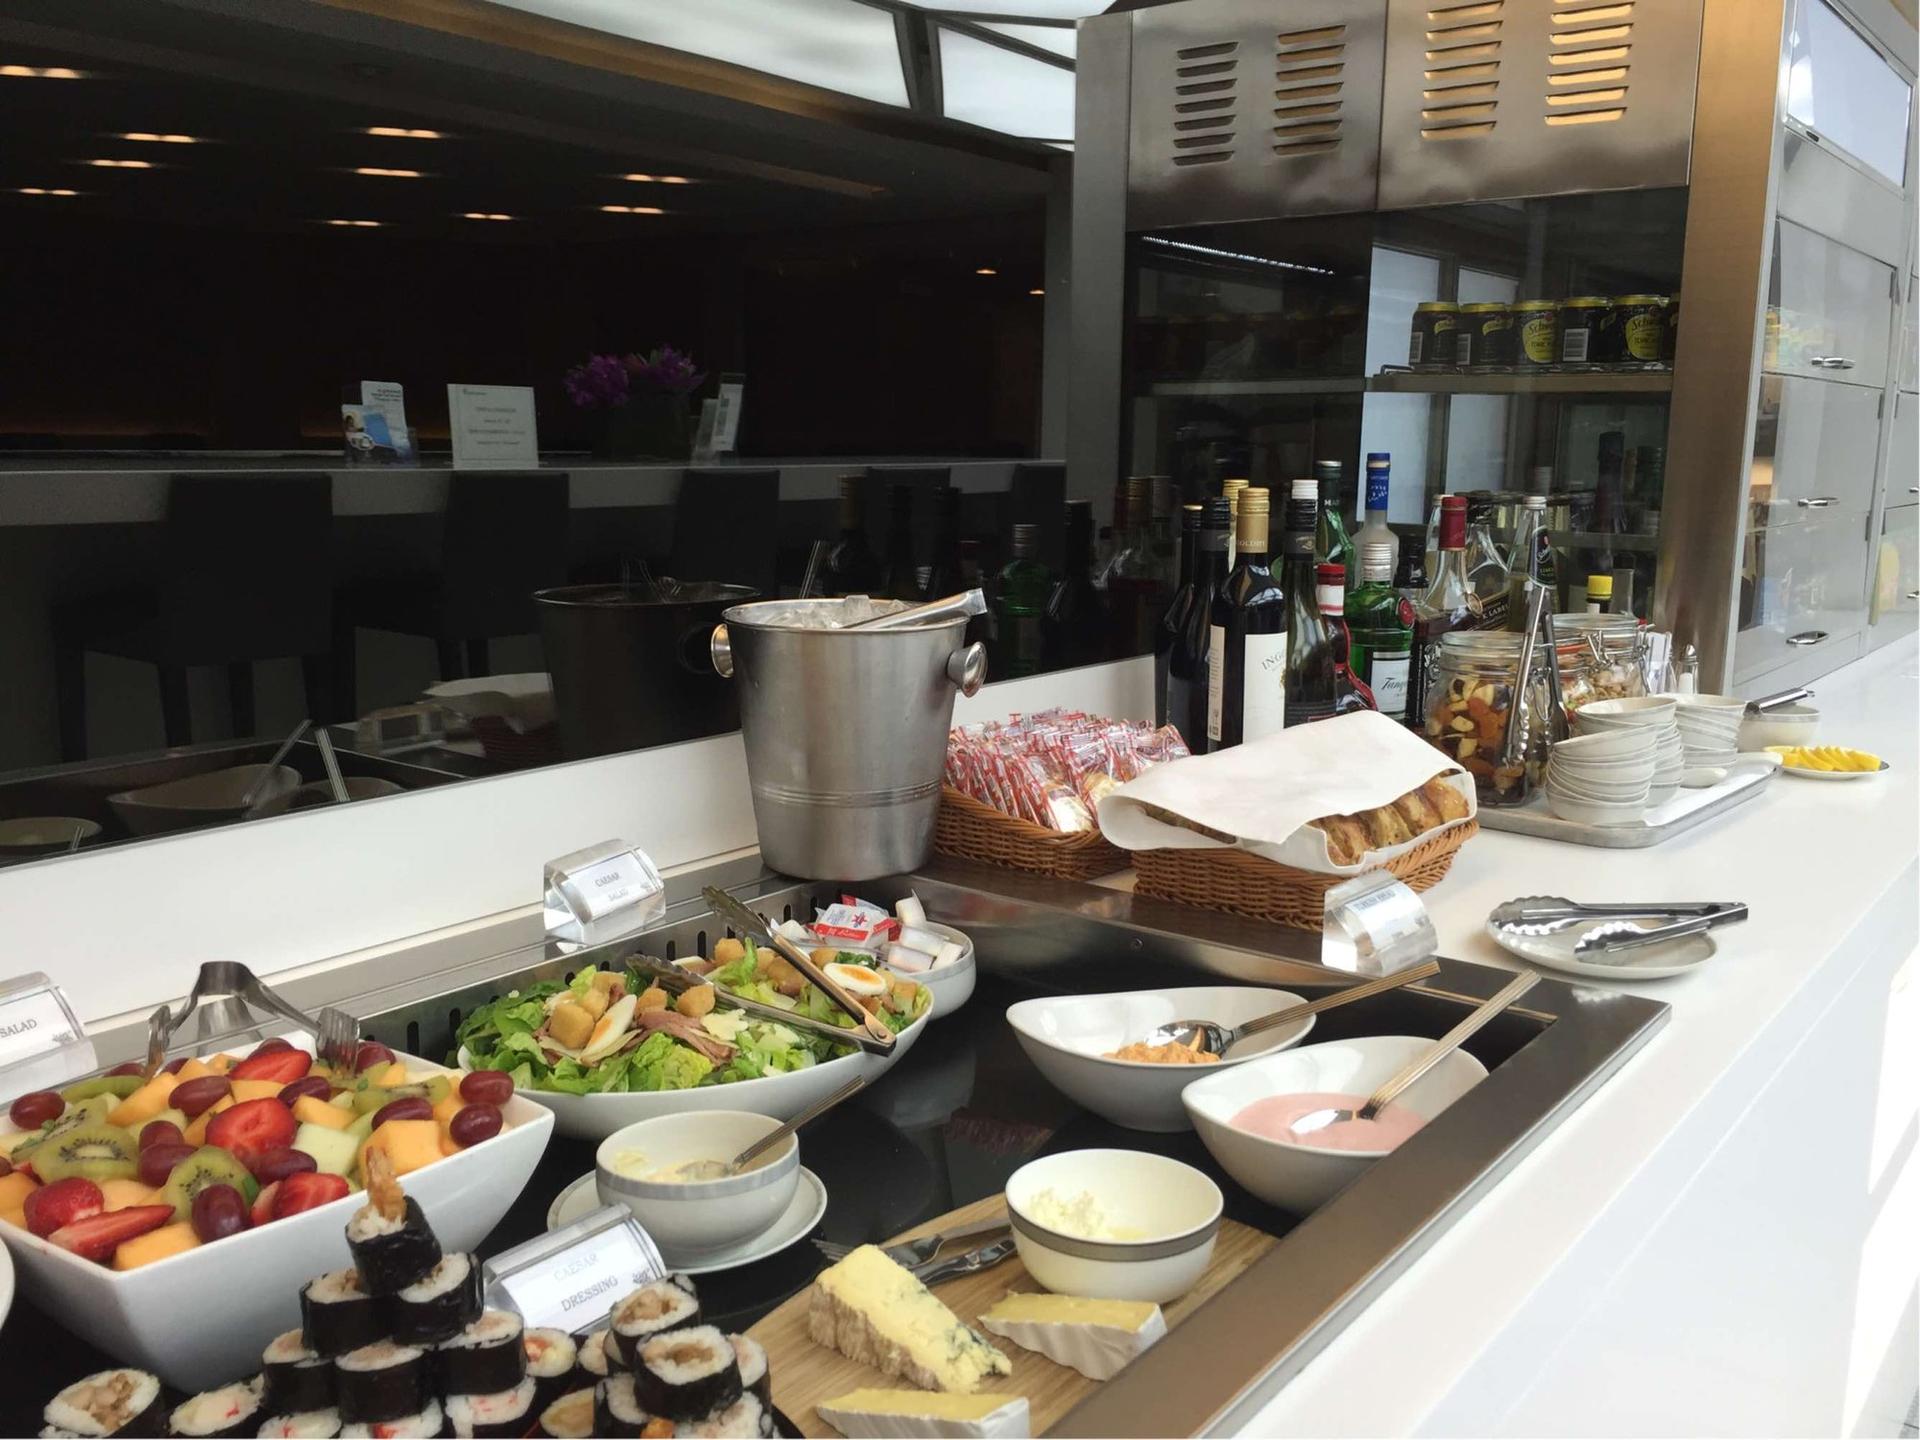 Singapore Airlines SilverKris Business Class Lounge image 2 of 7